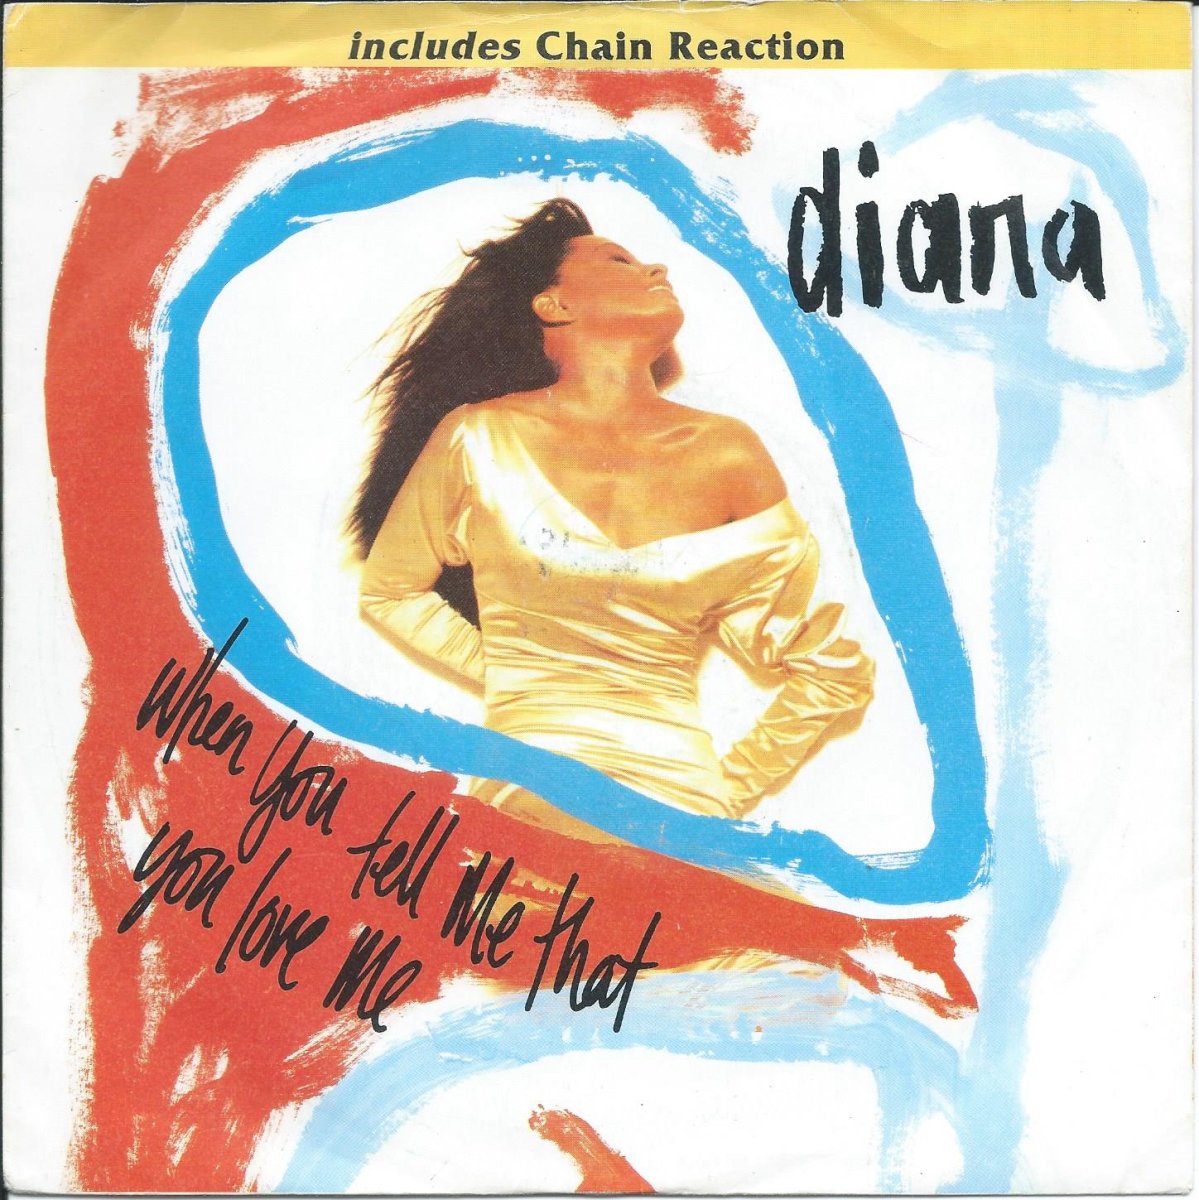 DIANA ROSS / WHEN YOU TELL ME THAT YOU LOVE ME / CHAIN REACTION (SINGLE VERSION) (7